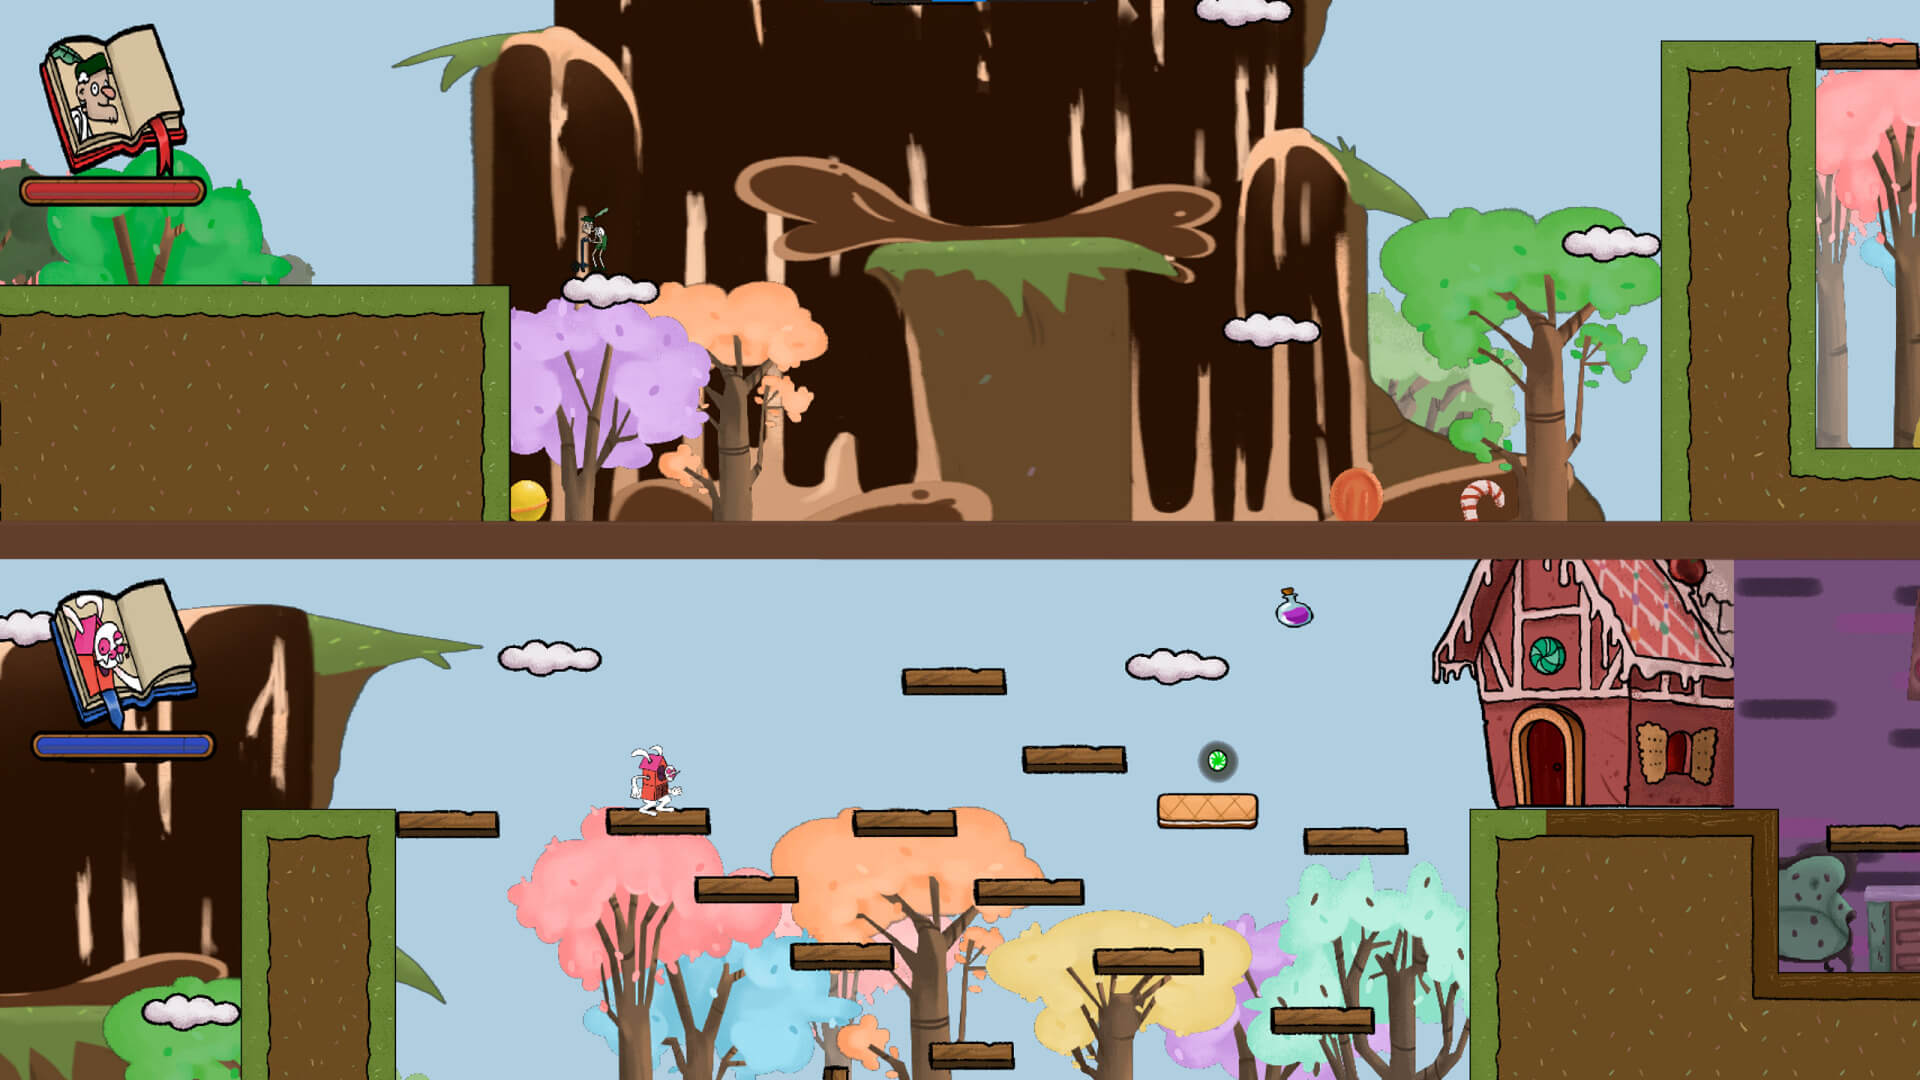 Two players race for the magic potion, each advancing at their own pace in a world composed of floating terrains and colorful trees.